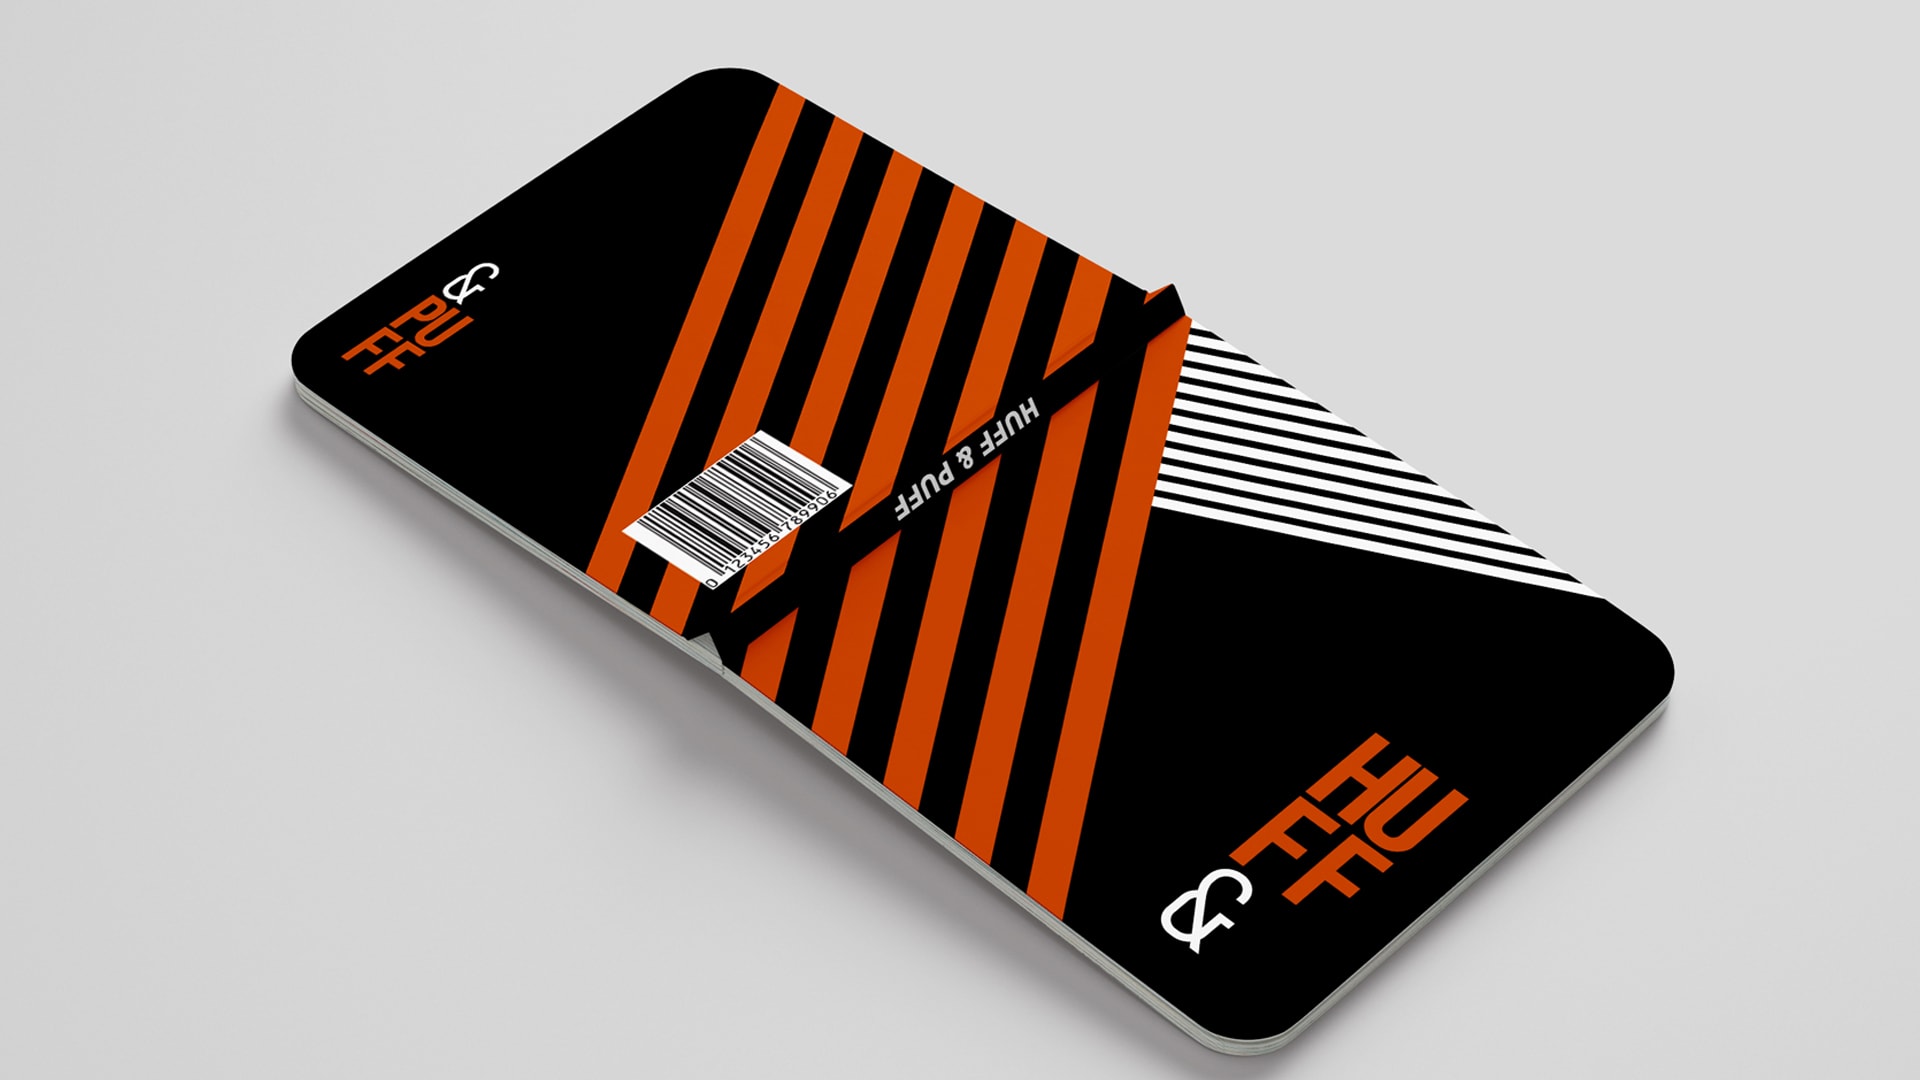 An image of a book cover design displaying the Huff and Puff B2B branding consisting of an orange and white chevron design on a black background and company logo